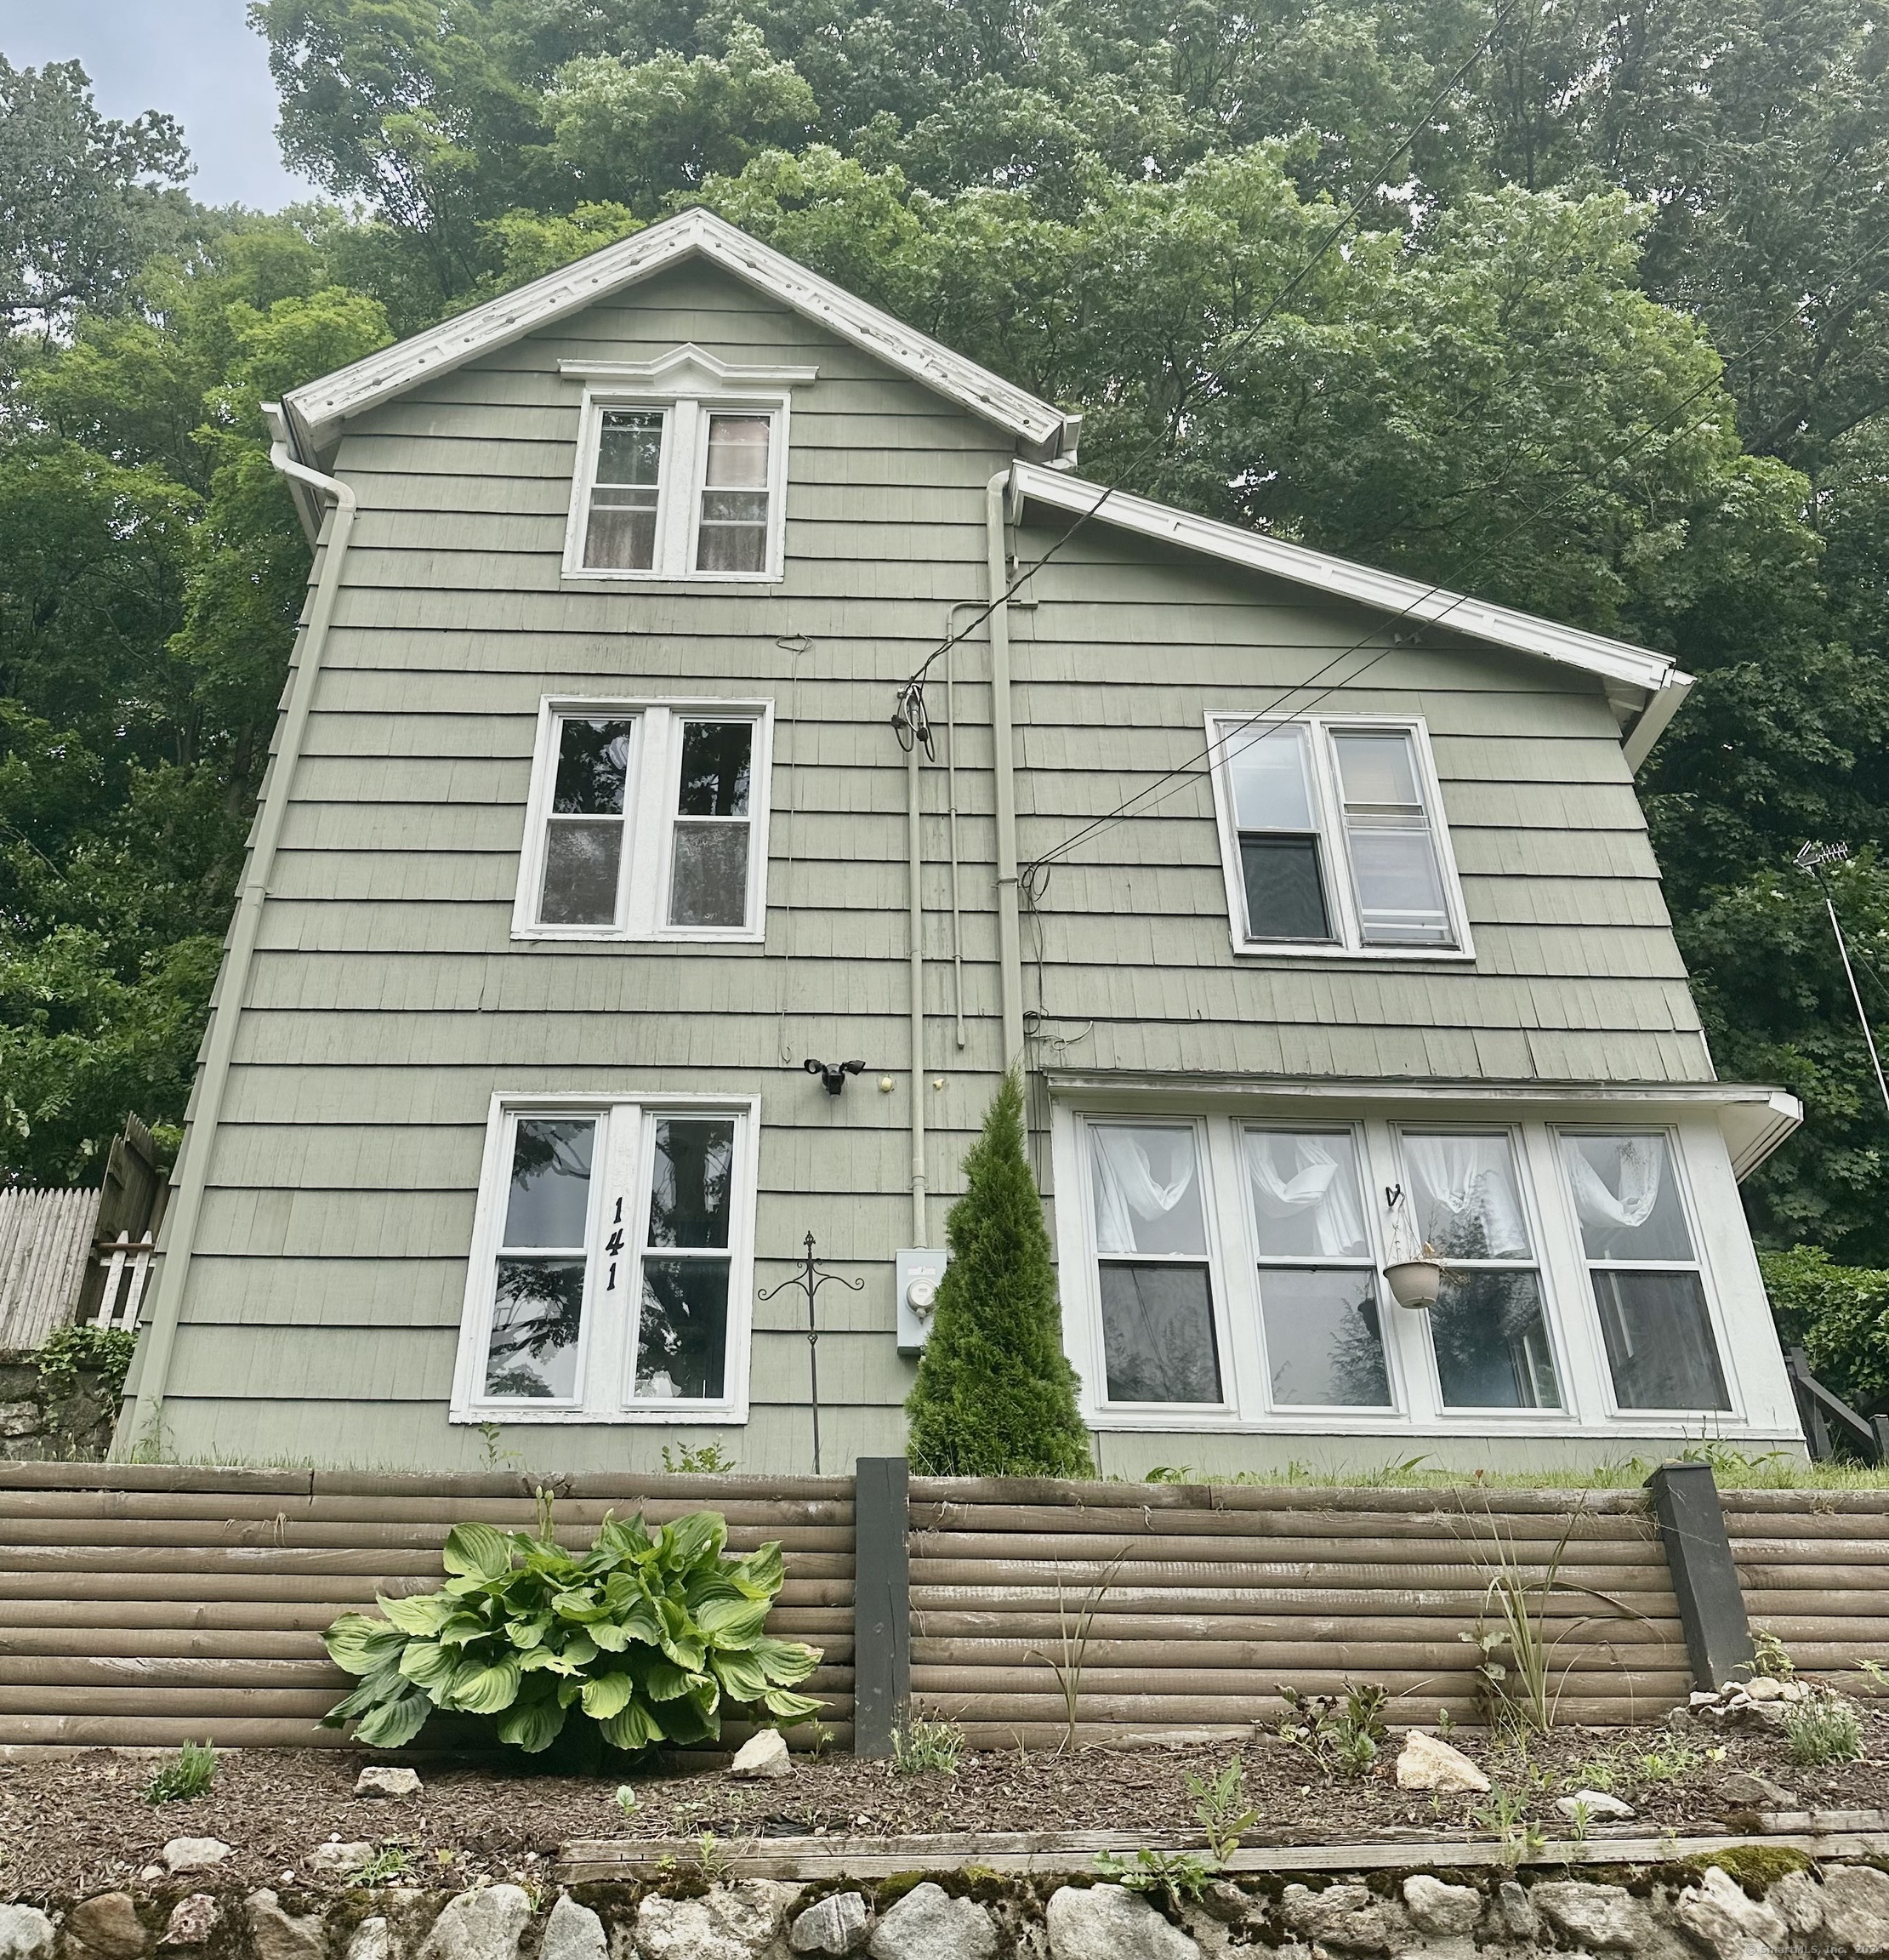 141 Hill Street Extension, Naugatuck, Connecticut - 3 Bedrooms  
2 Bathrooms  
8 Rooms - 